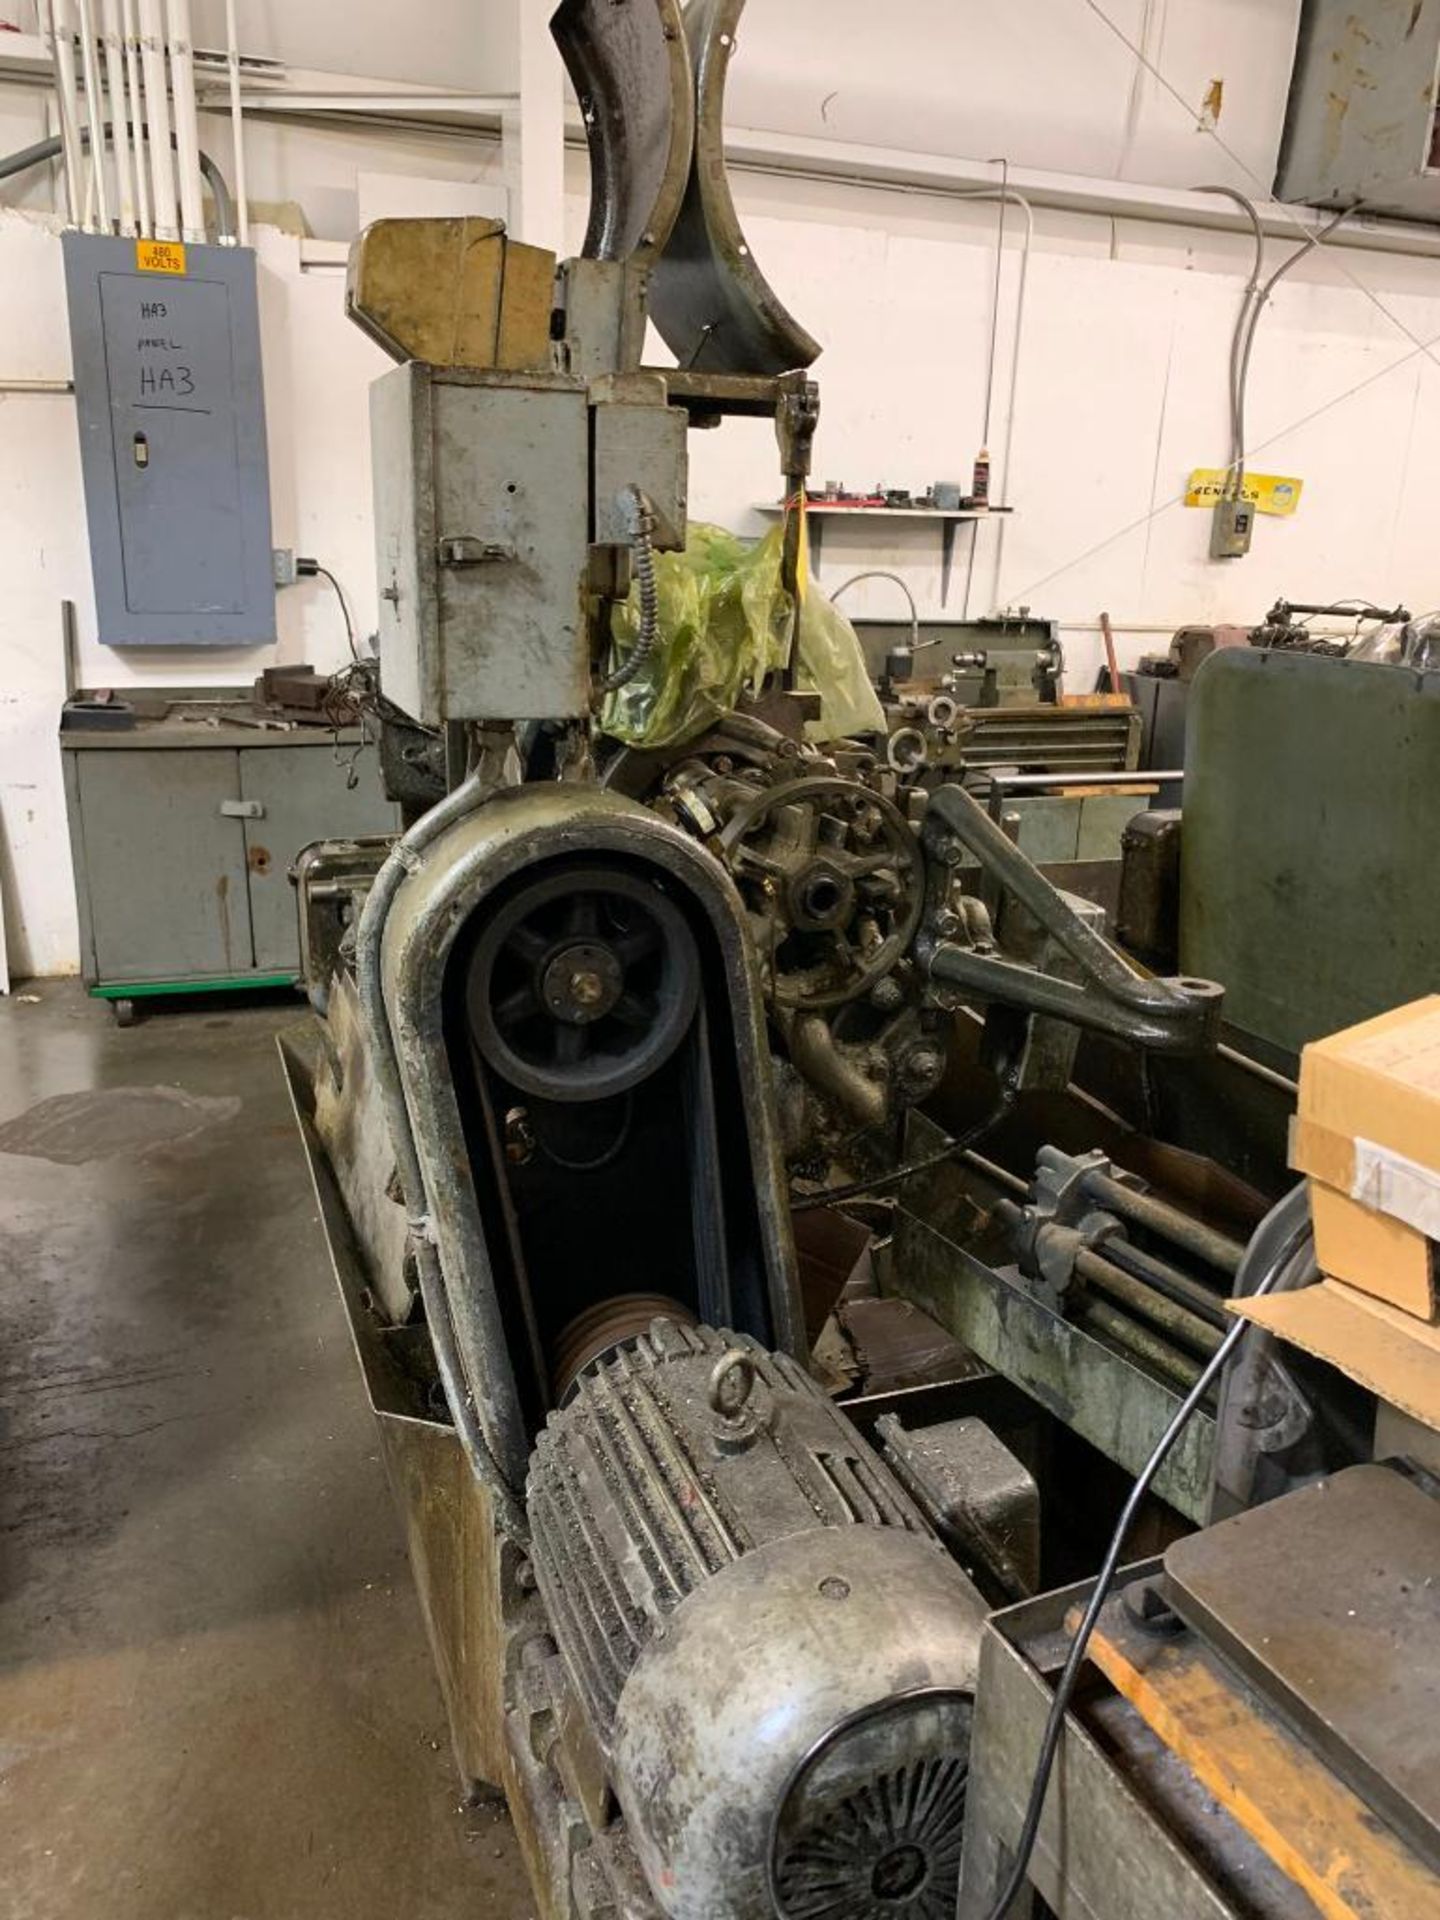 1967 Davenport Model B OS Multi-Spindle Screw Machine, S/N 5580 (Sat In Shop, Never Used) (Tool Hold - Image 3 of 4